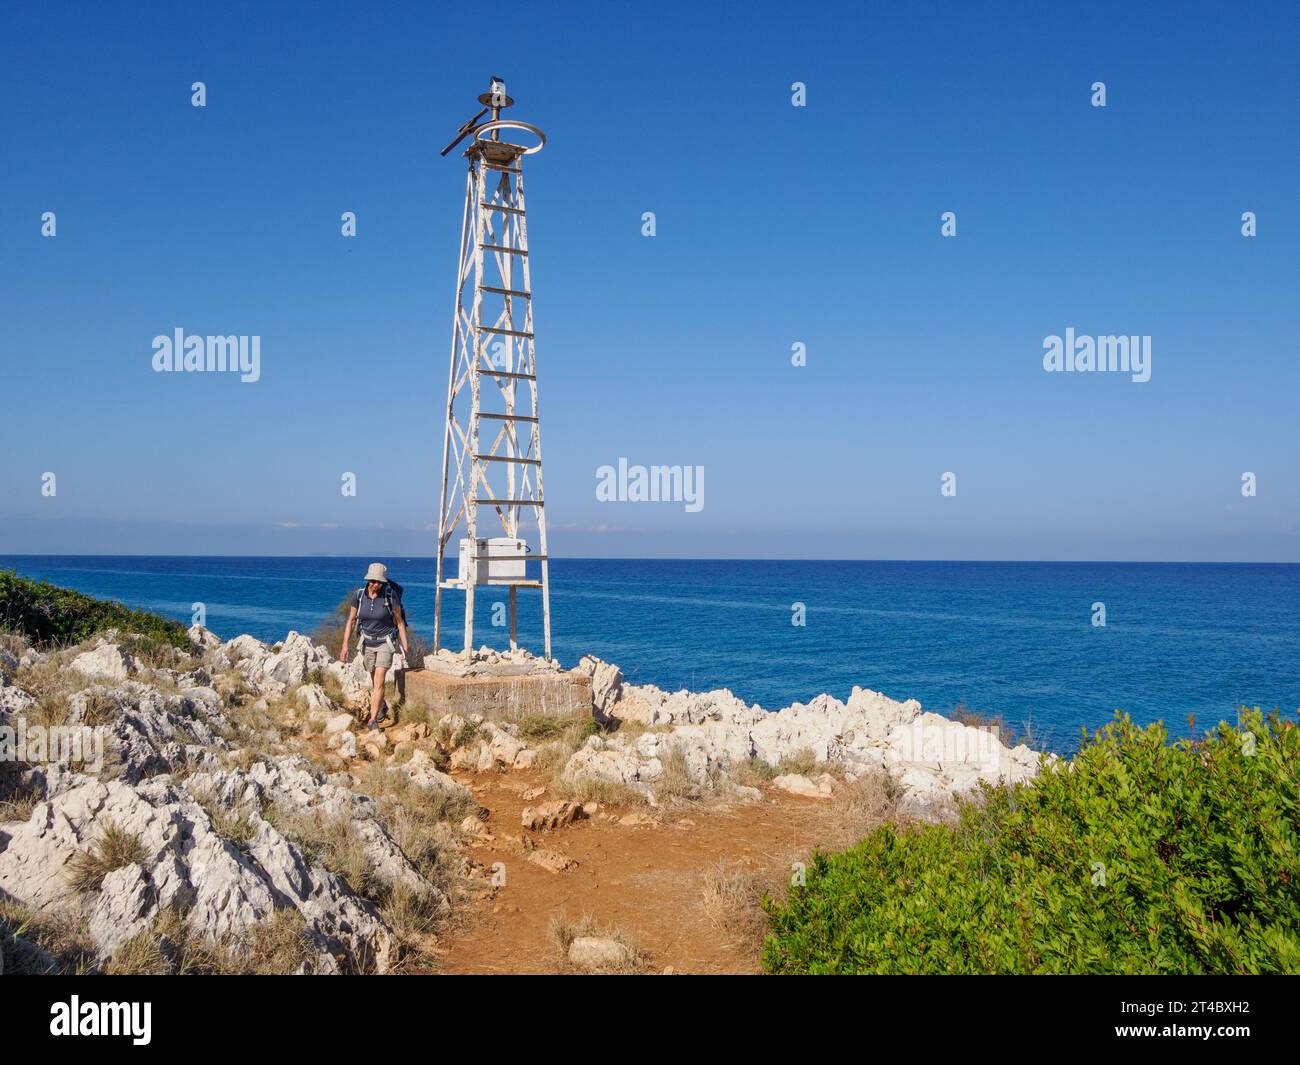 Walker rounding rocky Cape Agia Ekatarinis the most northerly point of Corfu with its small light beacon - Ionian Islands Greece Stock Photo